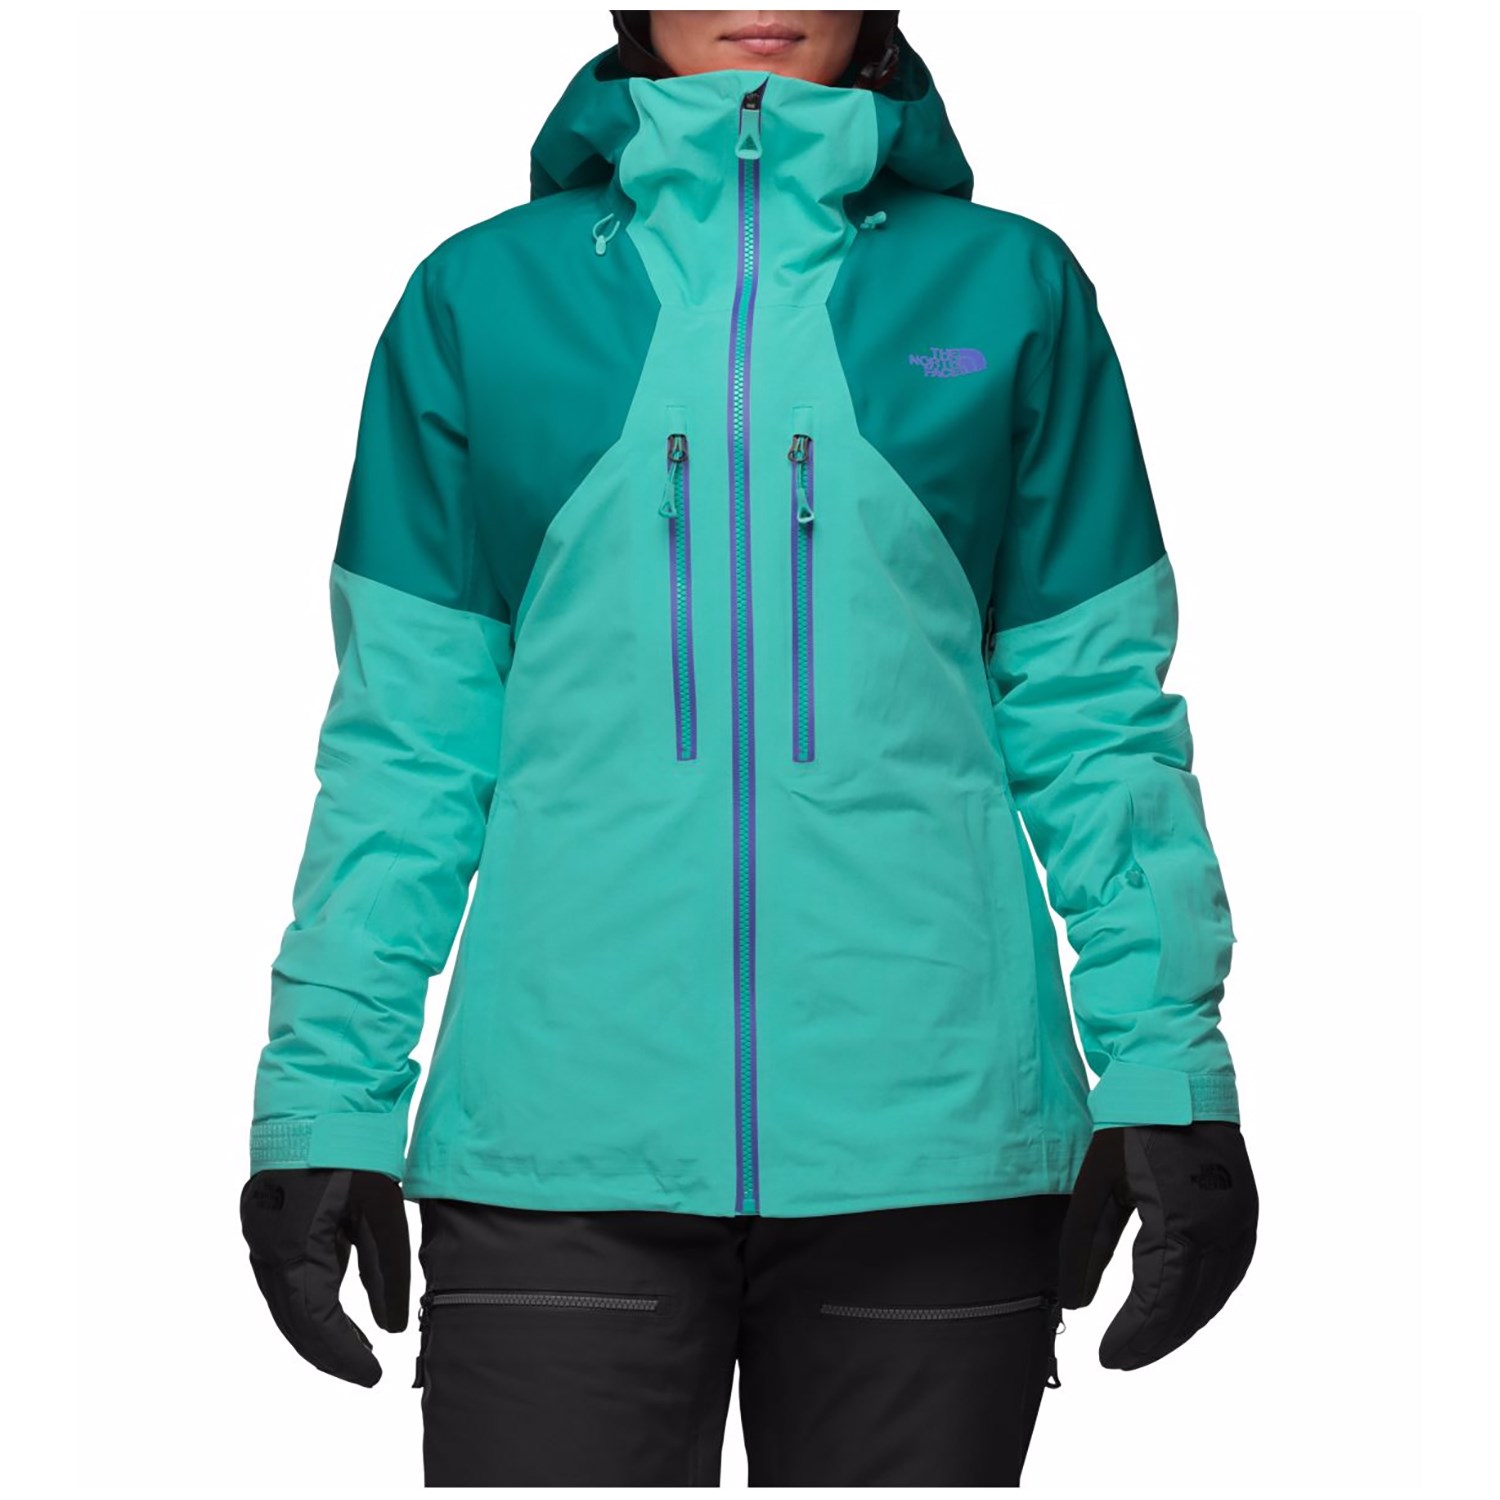 north face women's powder guide jacket